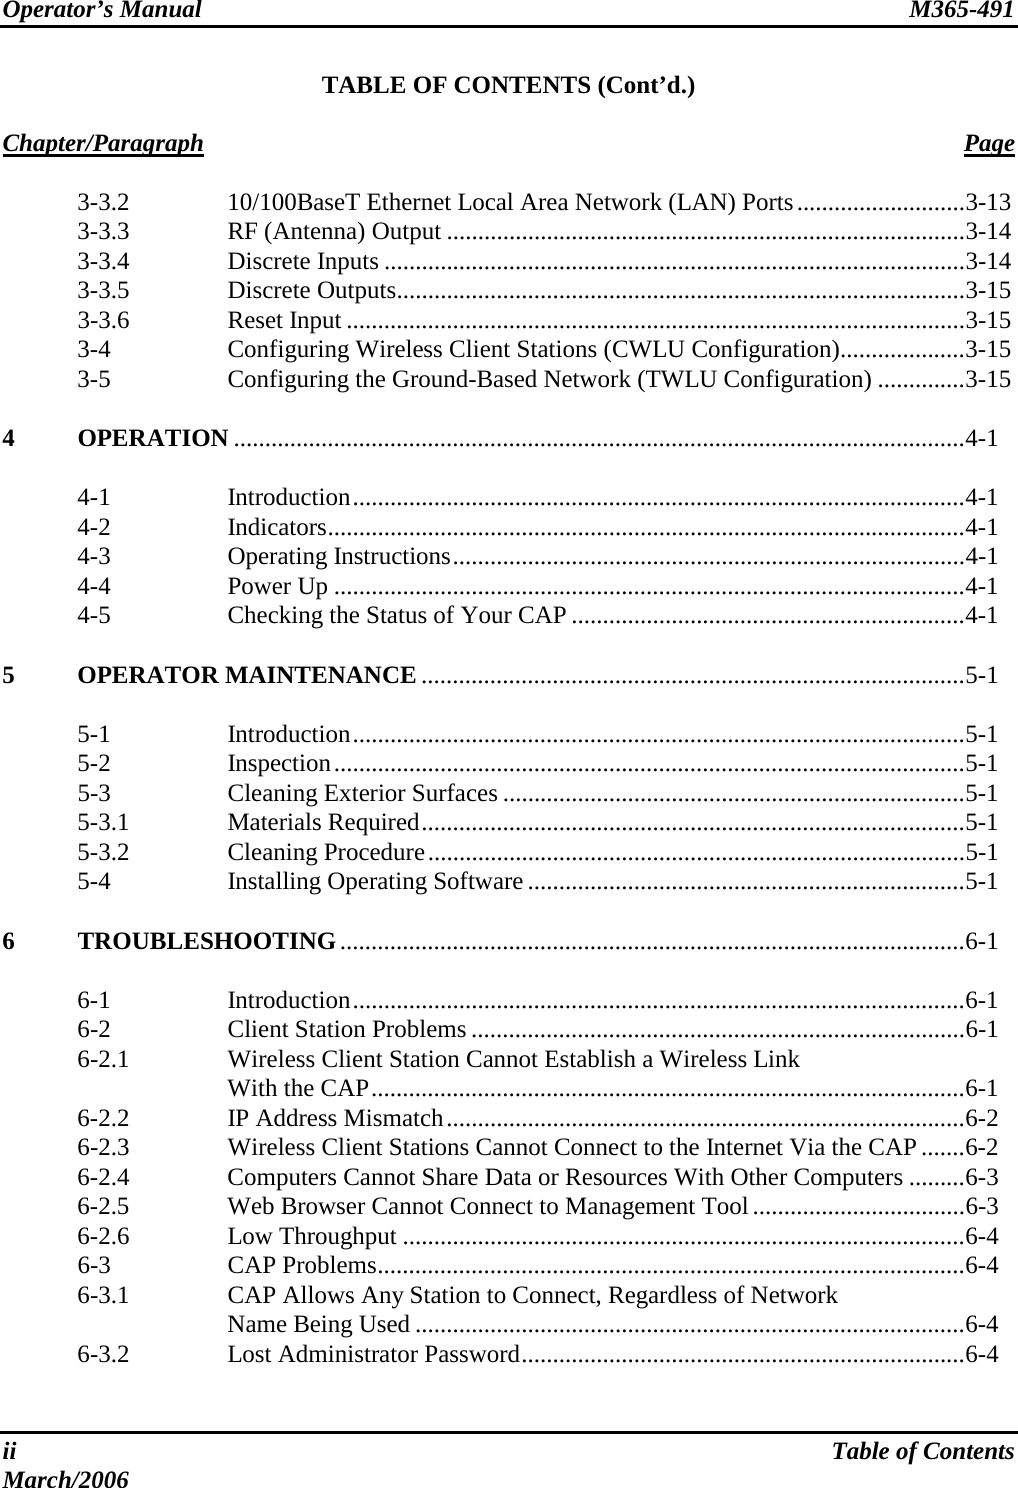 Operator’s Manual  M365-491   ii  Table of Contents March/2006 TABLE OF CONTENTS (Cont’d.)  Chapter/Paragraph Page    3-3.2  10/100BaseT Ethernet Local Area Network (LAN) Ports...........................3-13   3-3.3  RF (Antenna) Output ...................................................................................3-14  3-3.4  Discrete Inputs .............................................................................................3-14  3-3.5  Discrete Outputs...........................................................................................3-15  3-3.6  Reset Input ...................................................................................................3-15  3-4  Configuring Wireless Client Stations (CWLU Configuration)....................3-15   3-5  Configuring the Ground-Based Network (TWLU Configuration) ..............3-15  4 OPERATION .....................................................................................................................4-1   4-1  Introduction..................................................................................................4-1  4-2  Indicators......................................................................................................4-1  4-3  Operating Instructions..................................................................................4-1  4-4  Power Up .....................................................................................................4-1   4-5  Checking the Status of Your CAP ...............................................................4-1  5 OPERATOR MAINTENANCE .......................................................................................5-1   5-1  Introduction..................................................................................................5-1  5-2  Inspection.....................................................................................................5-1  5-3  Cleaning Exterior Surfaces ..........................................................................5-1  5-3.1  Materials Required.......................................................................................5-1  5-3.2  Cleaning Procedure......................................................................................5-1   5-4  Installing Operating Software ......................................................................5-1  6 TROUBLESHOOTING....................................................................................................6-1   6-1  Introduction..................................................................................................6-1   6-2  Client Station Problems ...............................................................................6-1   6-2.1  Wireless Client Station Cannot Establish a Wireless Link  With the CAP...............................................................................................6-1   6-2.2  IP Address Mismatch...................................................................................6-2   6-2.3  Wireless Client Stations Cannot Connect to the Internet Via the CAP.......6-2   6-2.4  Computers Cannot Share Data or Resources With Other Computers .........6-3   6-2.5  Web Browser Cannot Connect to Management Tool..................................6-3  6-2.6  Low Throughput ..........................................................................................6-4  6-3  CAP Problems..............................................................................................6-4   6-3.1  CAP Allows Any Station to Connect, Regardless of Network  Name Being Used ........................................................................................6-4  6-3.2  Lost Administrator Password.......................................................................6-4  